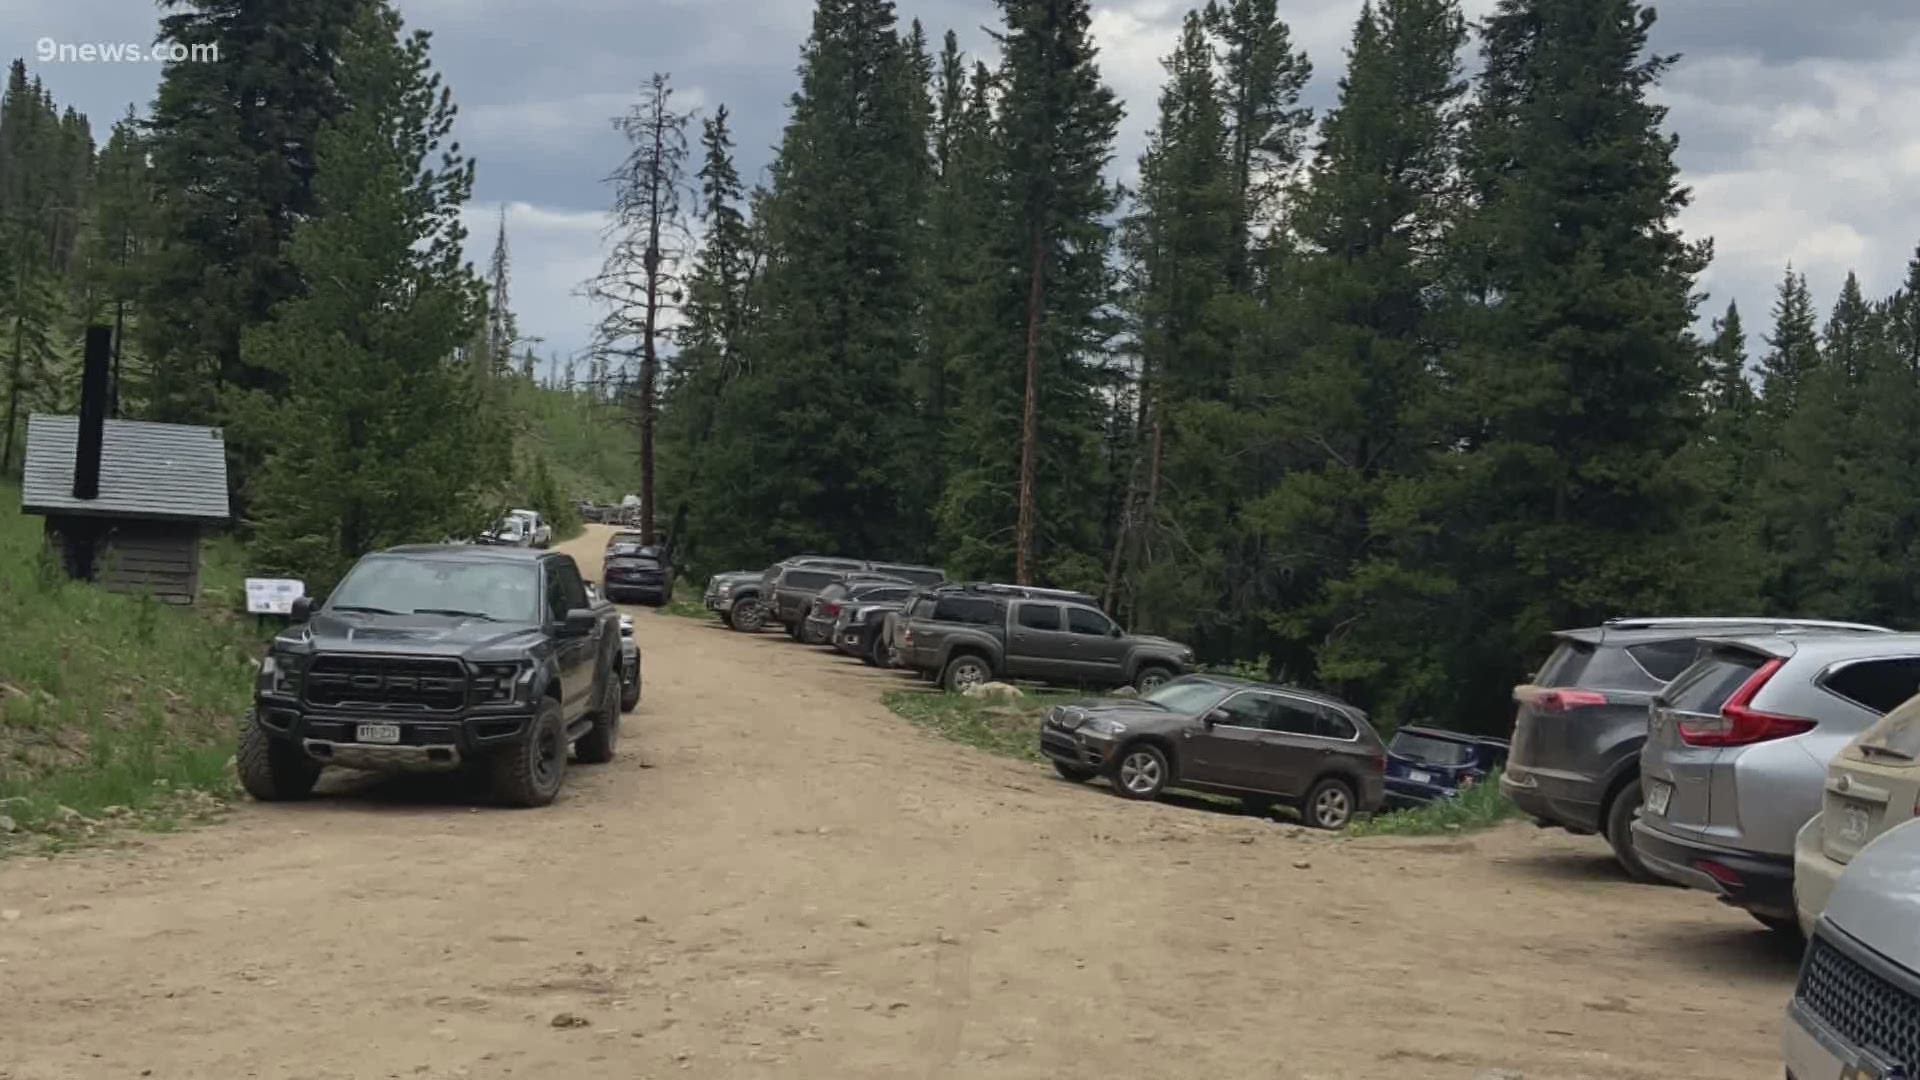 White River National Forest supervisors said 4th of  July holiday brought the biggest crowds they've seen to popular attractions like Maroon Bells and Hanging Lake.